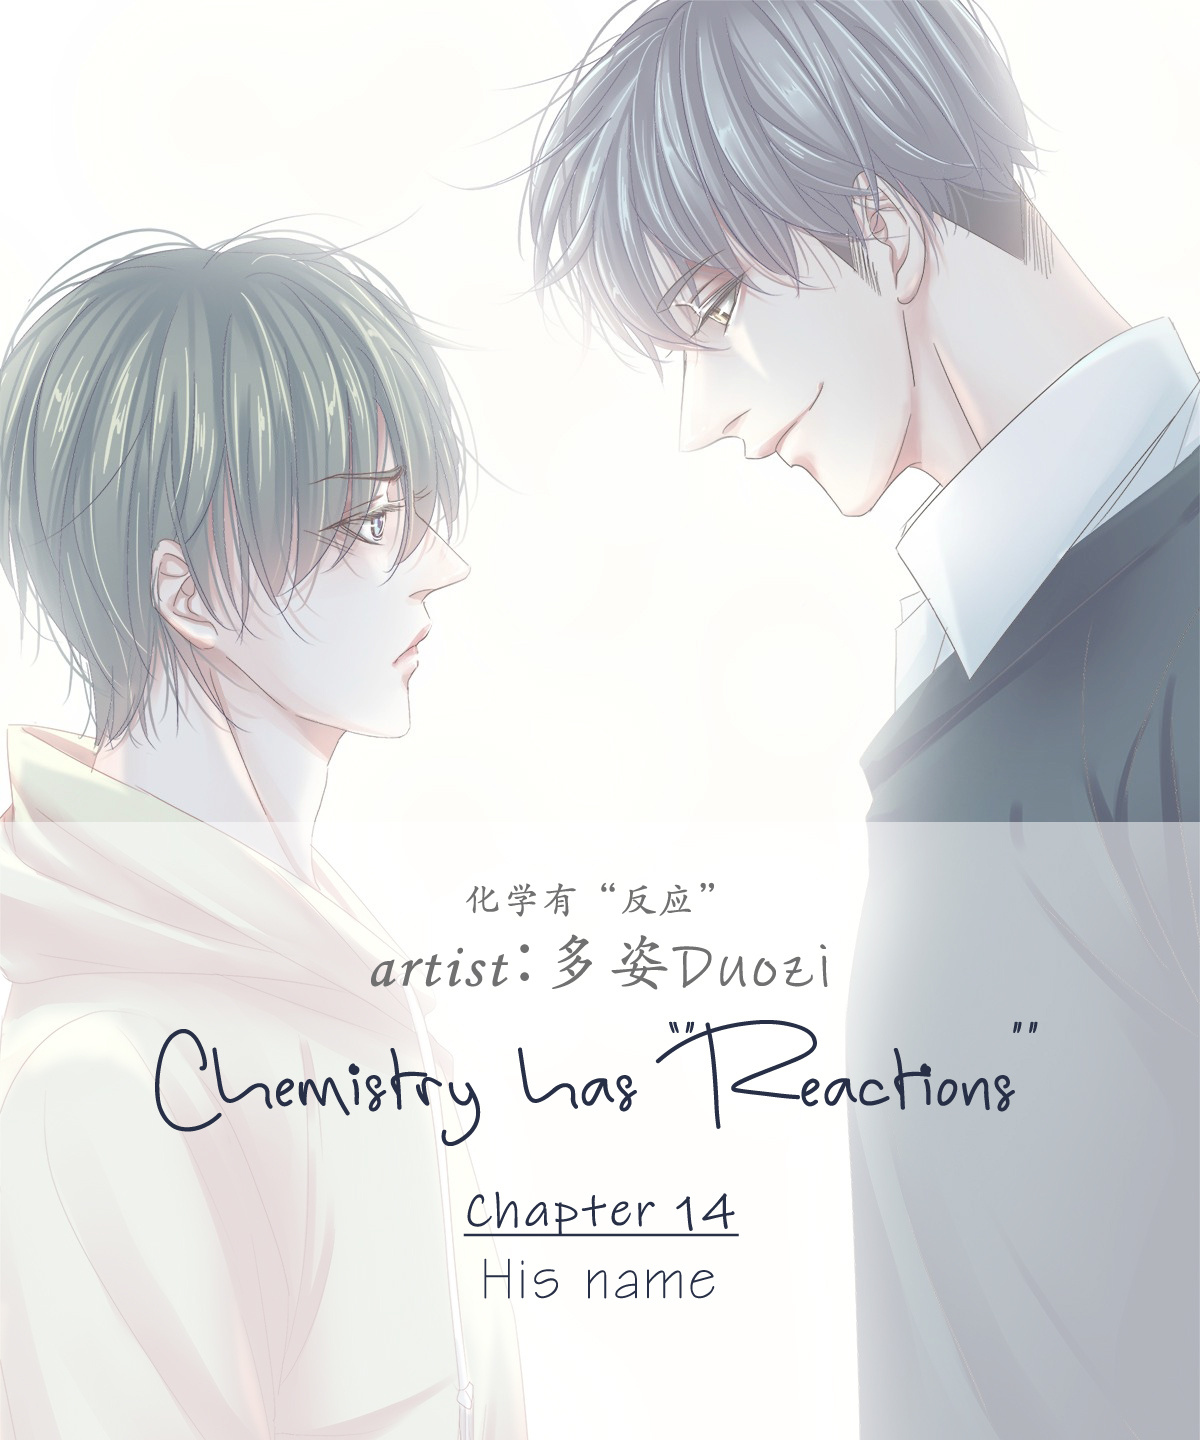 Chemistry Has "reactions" Chapter 14 #1